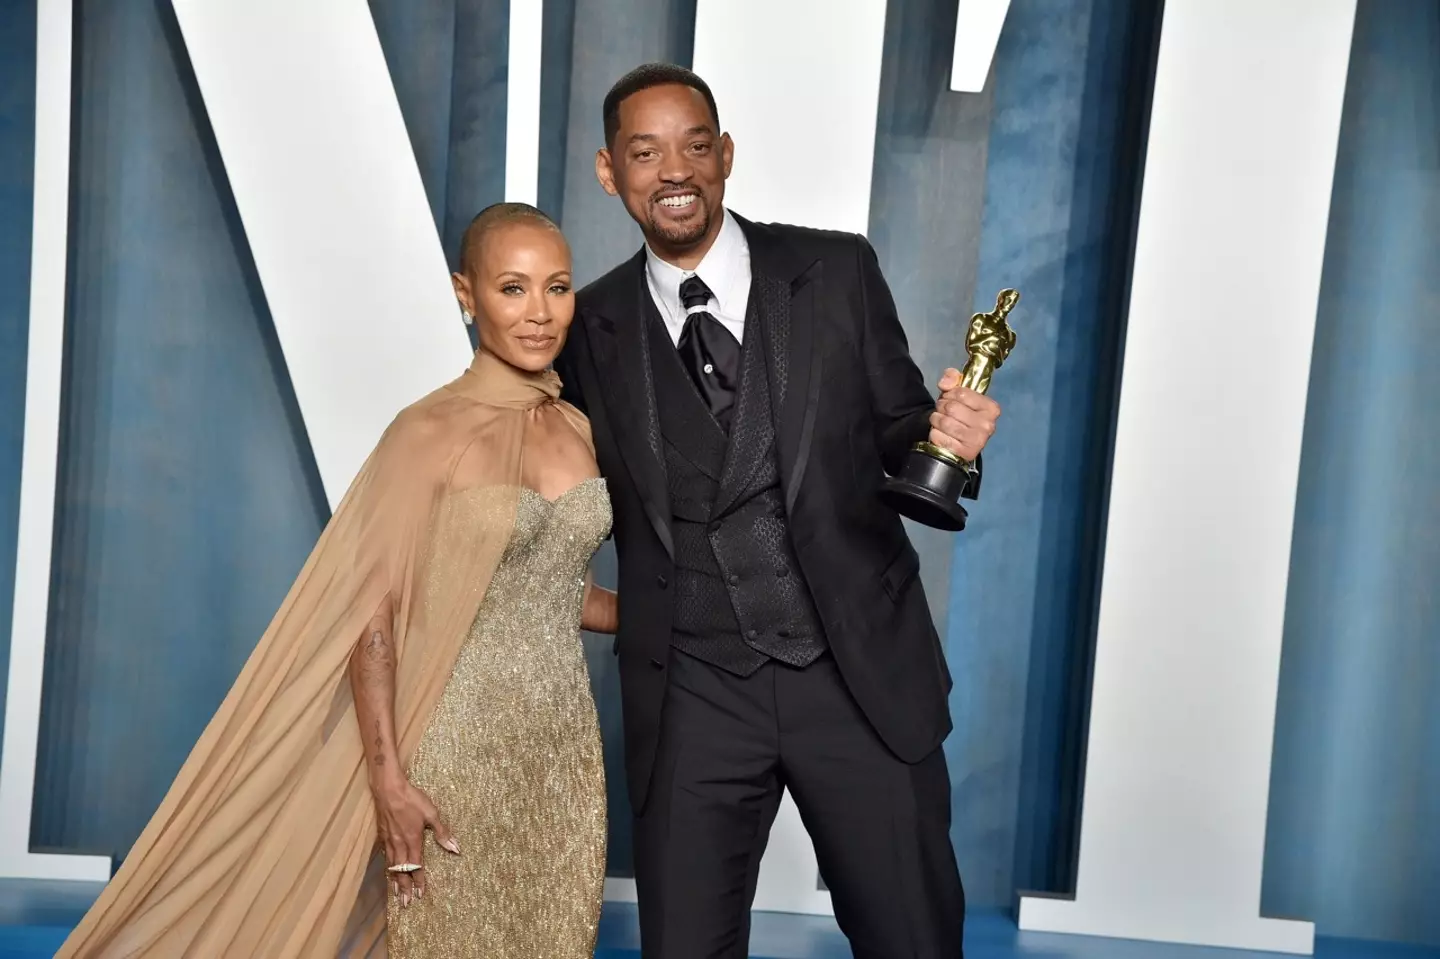 Jada Pinkett Smith claims Will Smith chatted her up when he was with his ex-wife.